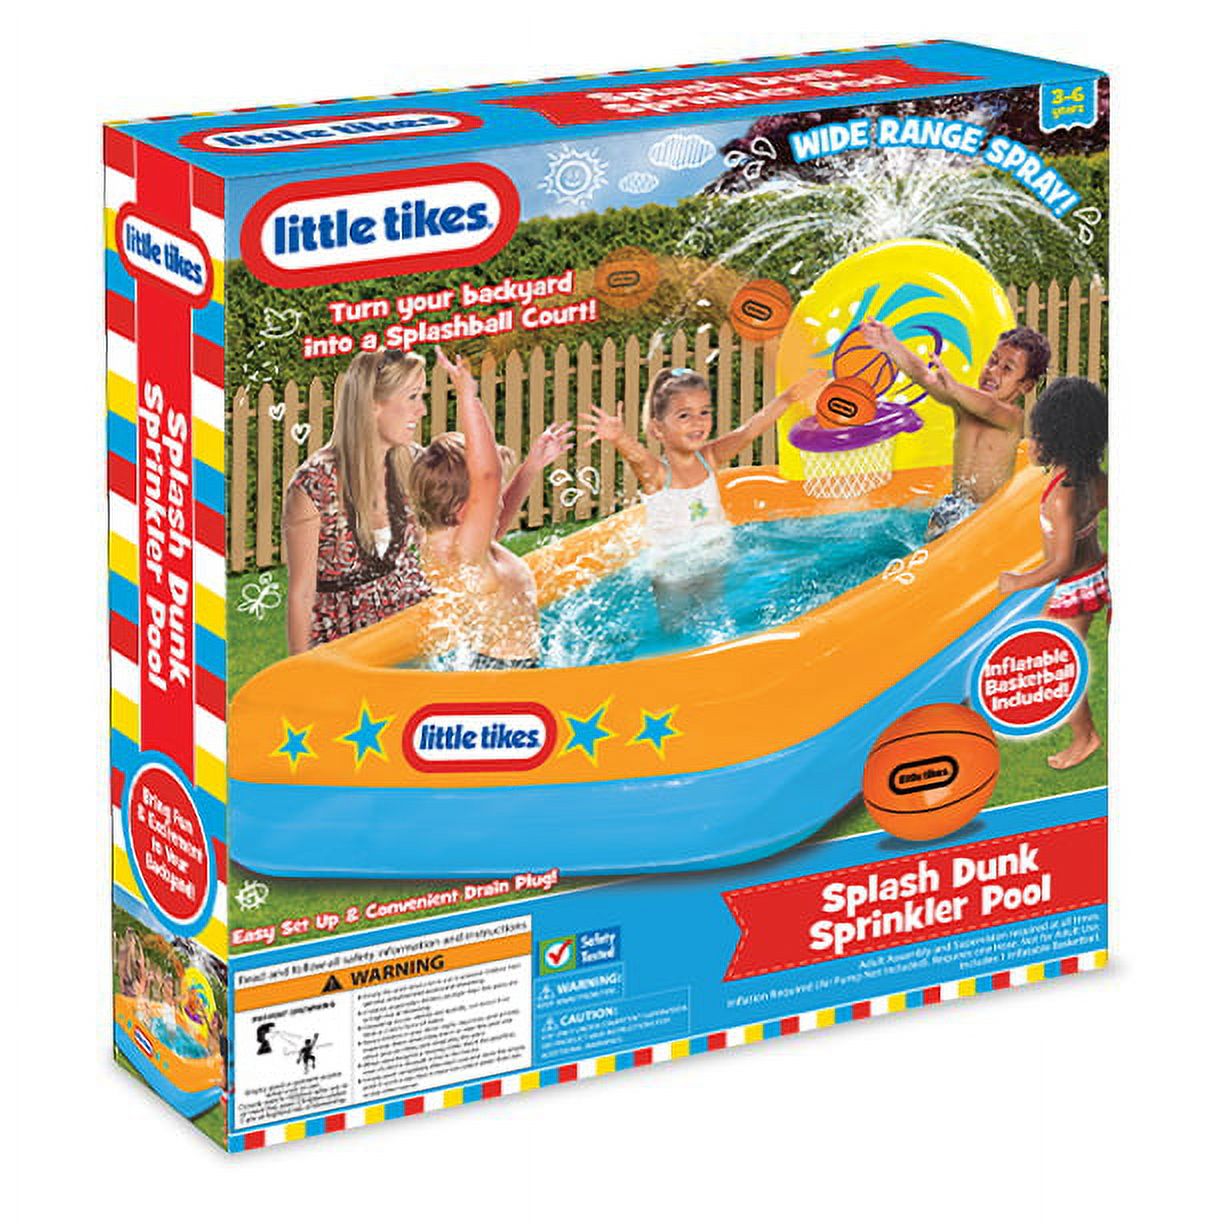 Little Tikes Splash Dunk Sprinkler Pool, Inflatable Pool with Basketball Hoop and Ball for Kids Ages 3-6 - image 2 of 5